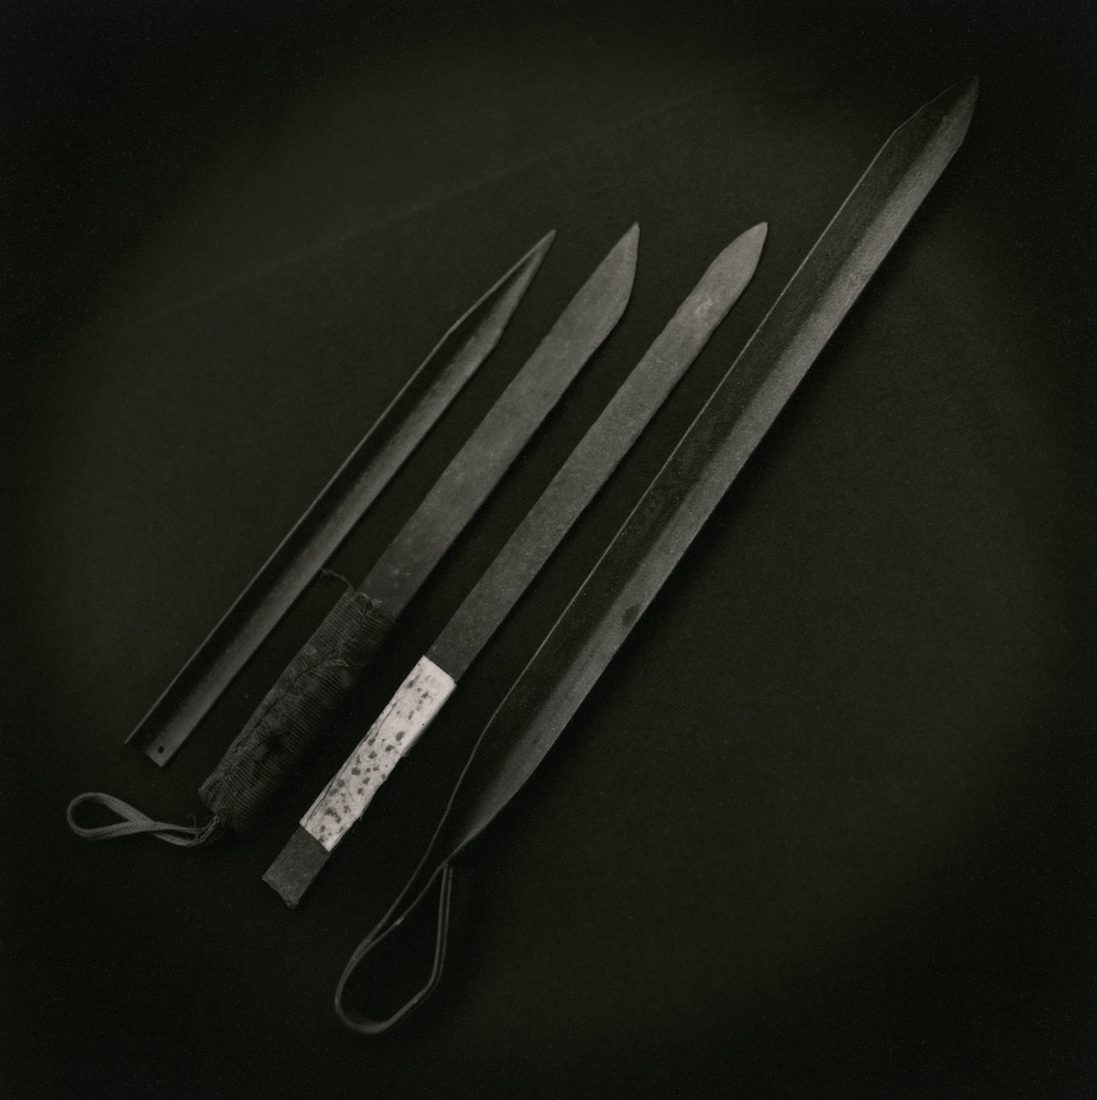   Confiscated weapons from maximum security prison   Toned gelatin silver print.   16 x 16 in.&nbsp; (40 x 40 cm.) 